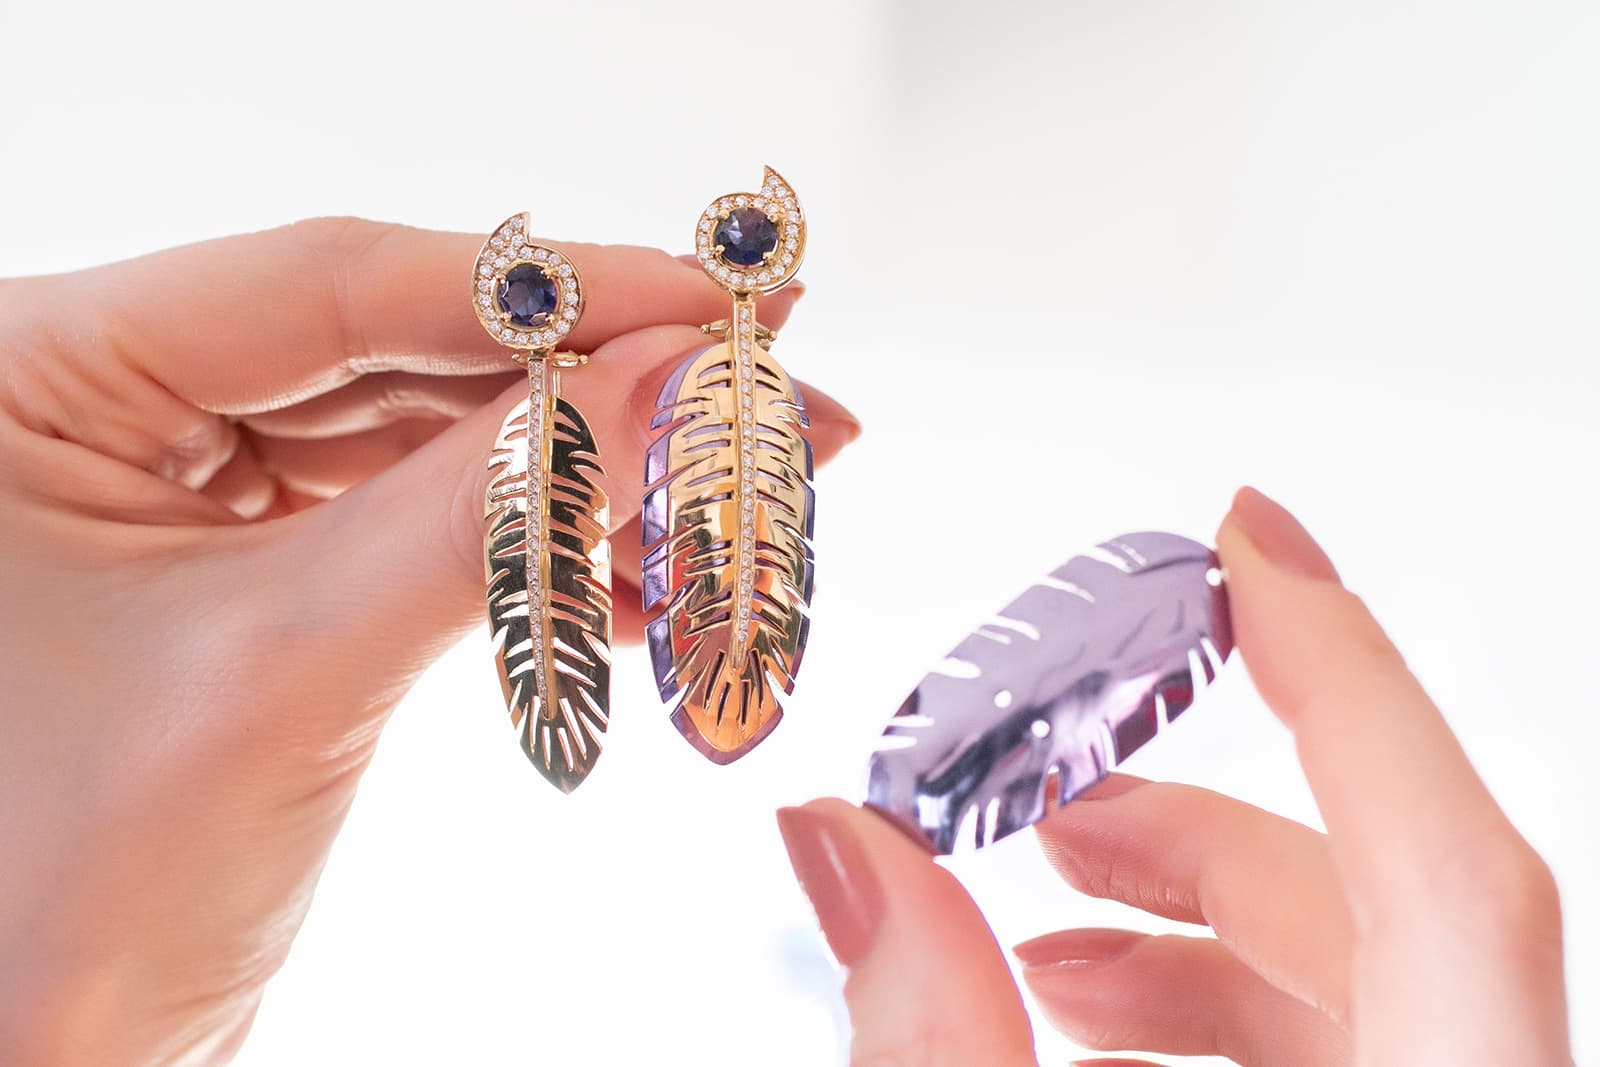 Carol Kauffmann 'Banana Leaf' medium earrings from the 'Botanica' collection with diamonds and 1.20ct iolite in nano-ceramic coated silver and yellow gold